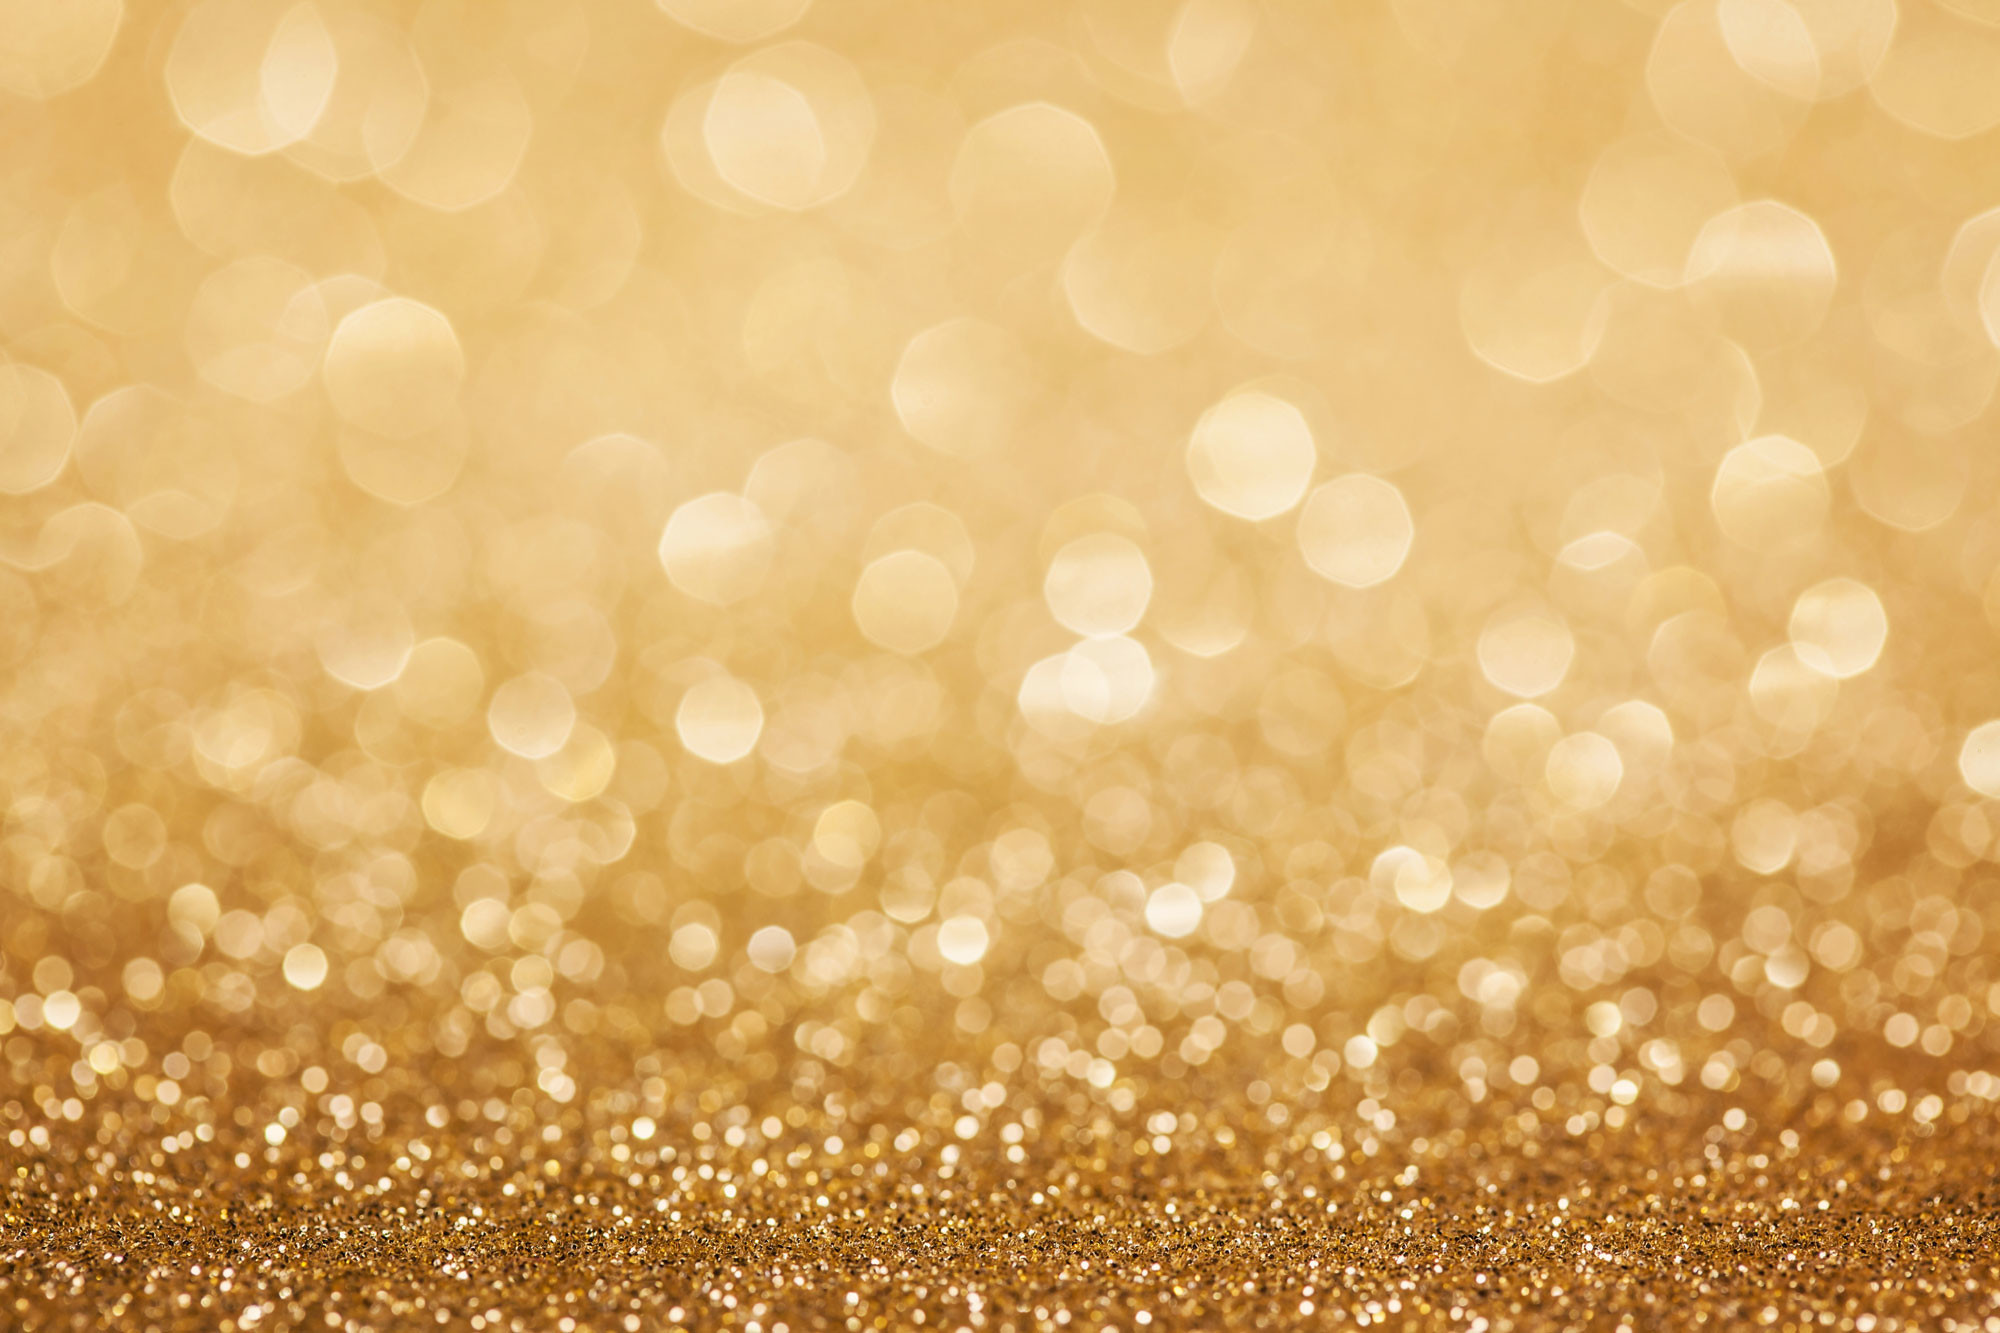 2000x1333 Explore and share Gold Glitter Background Wallpaper on WallpaperSafari